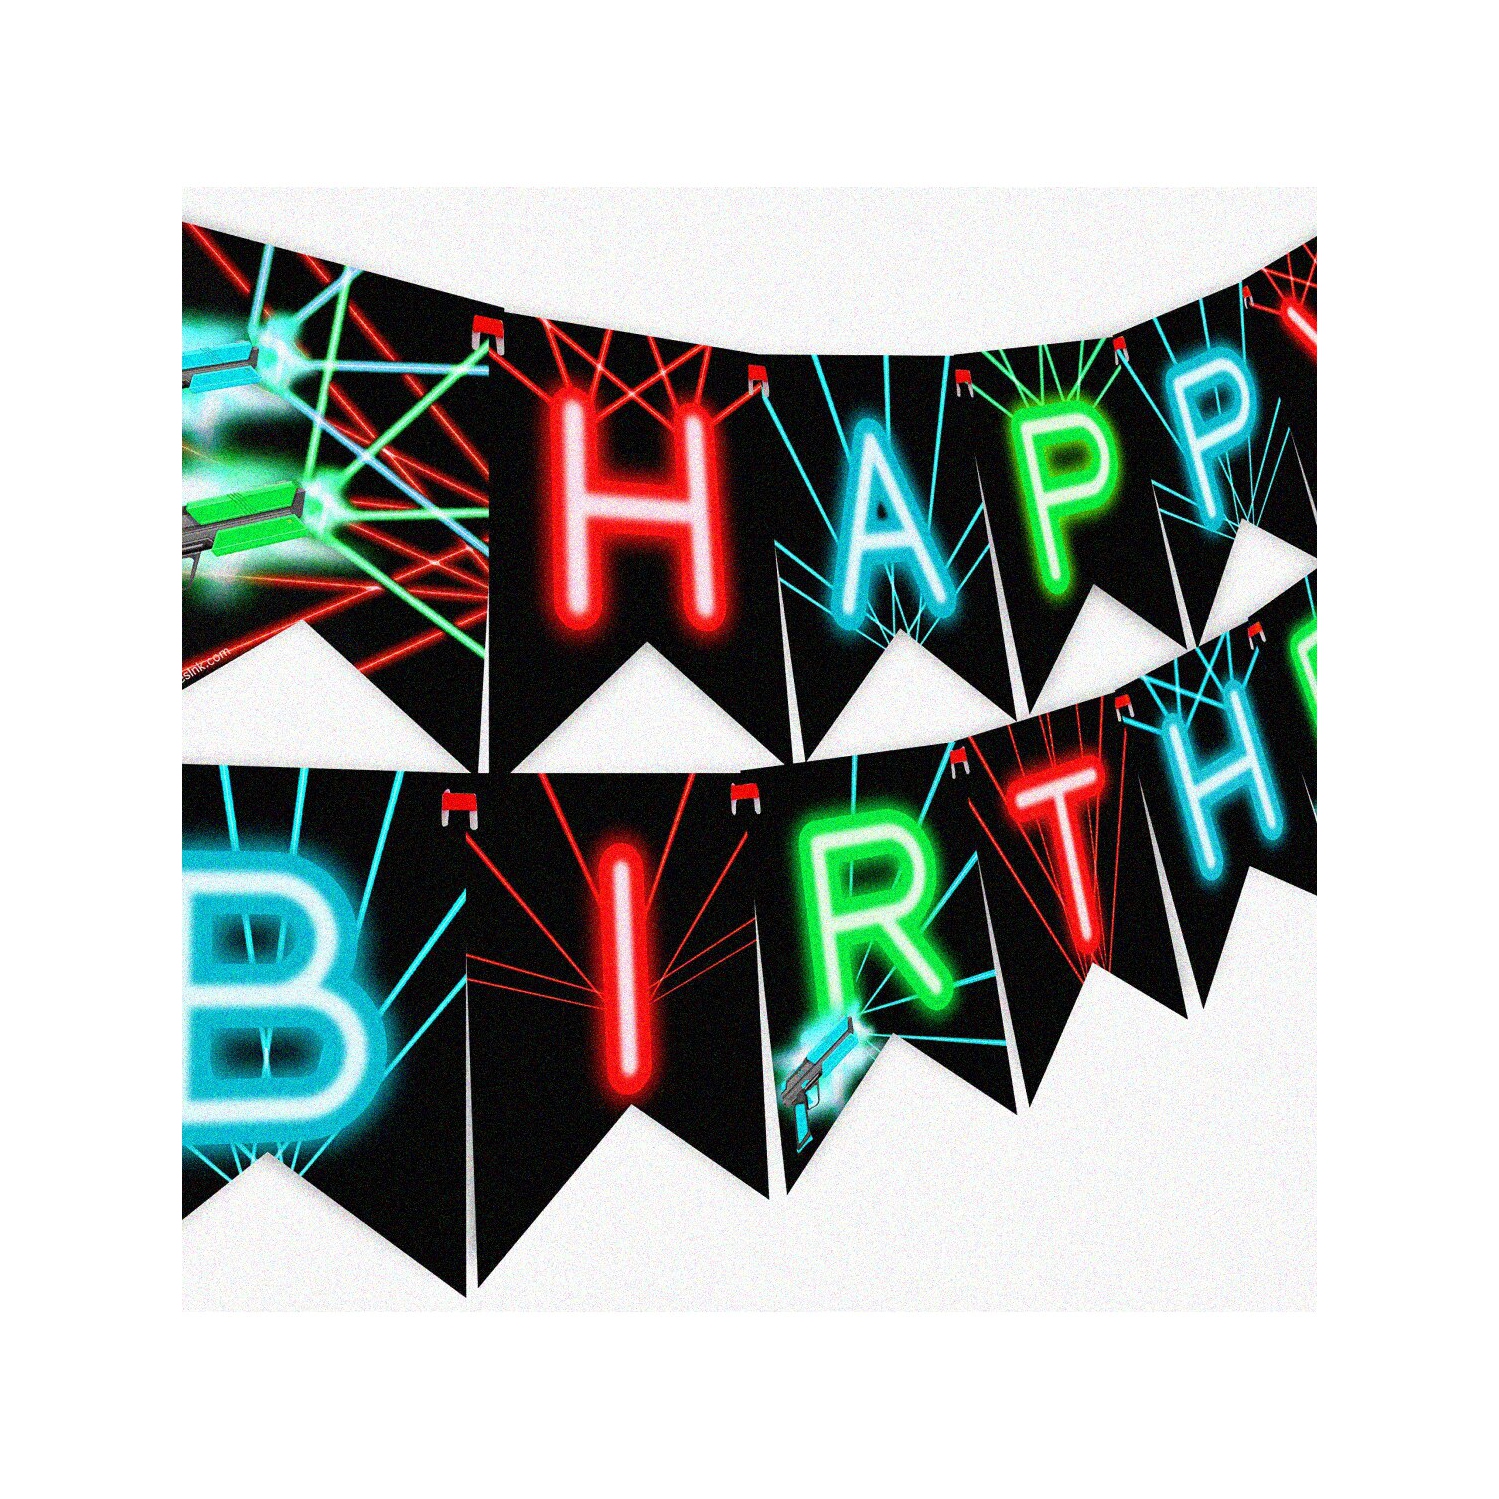 Laser Tag Blast Party Kit - Vibrant Decorations, Happy Birthday Banner, Pennant Flags - Ultimate Laser Tag Party Supplies